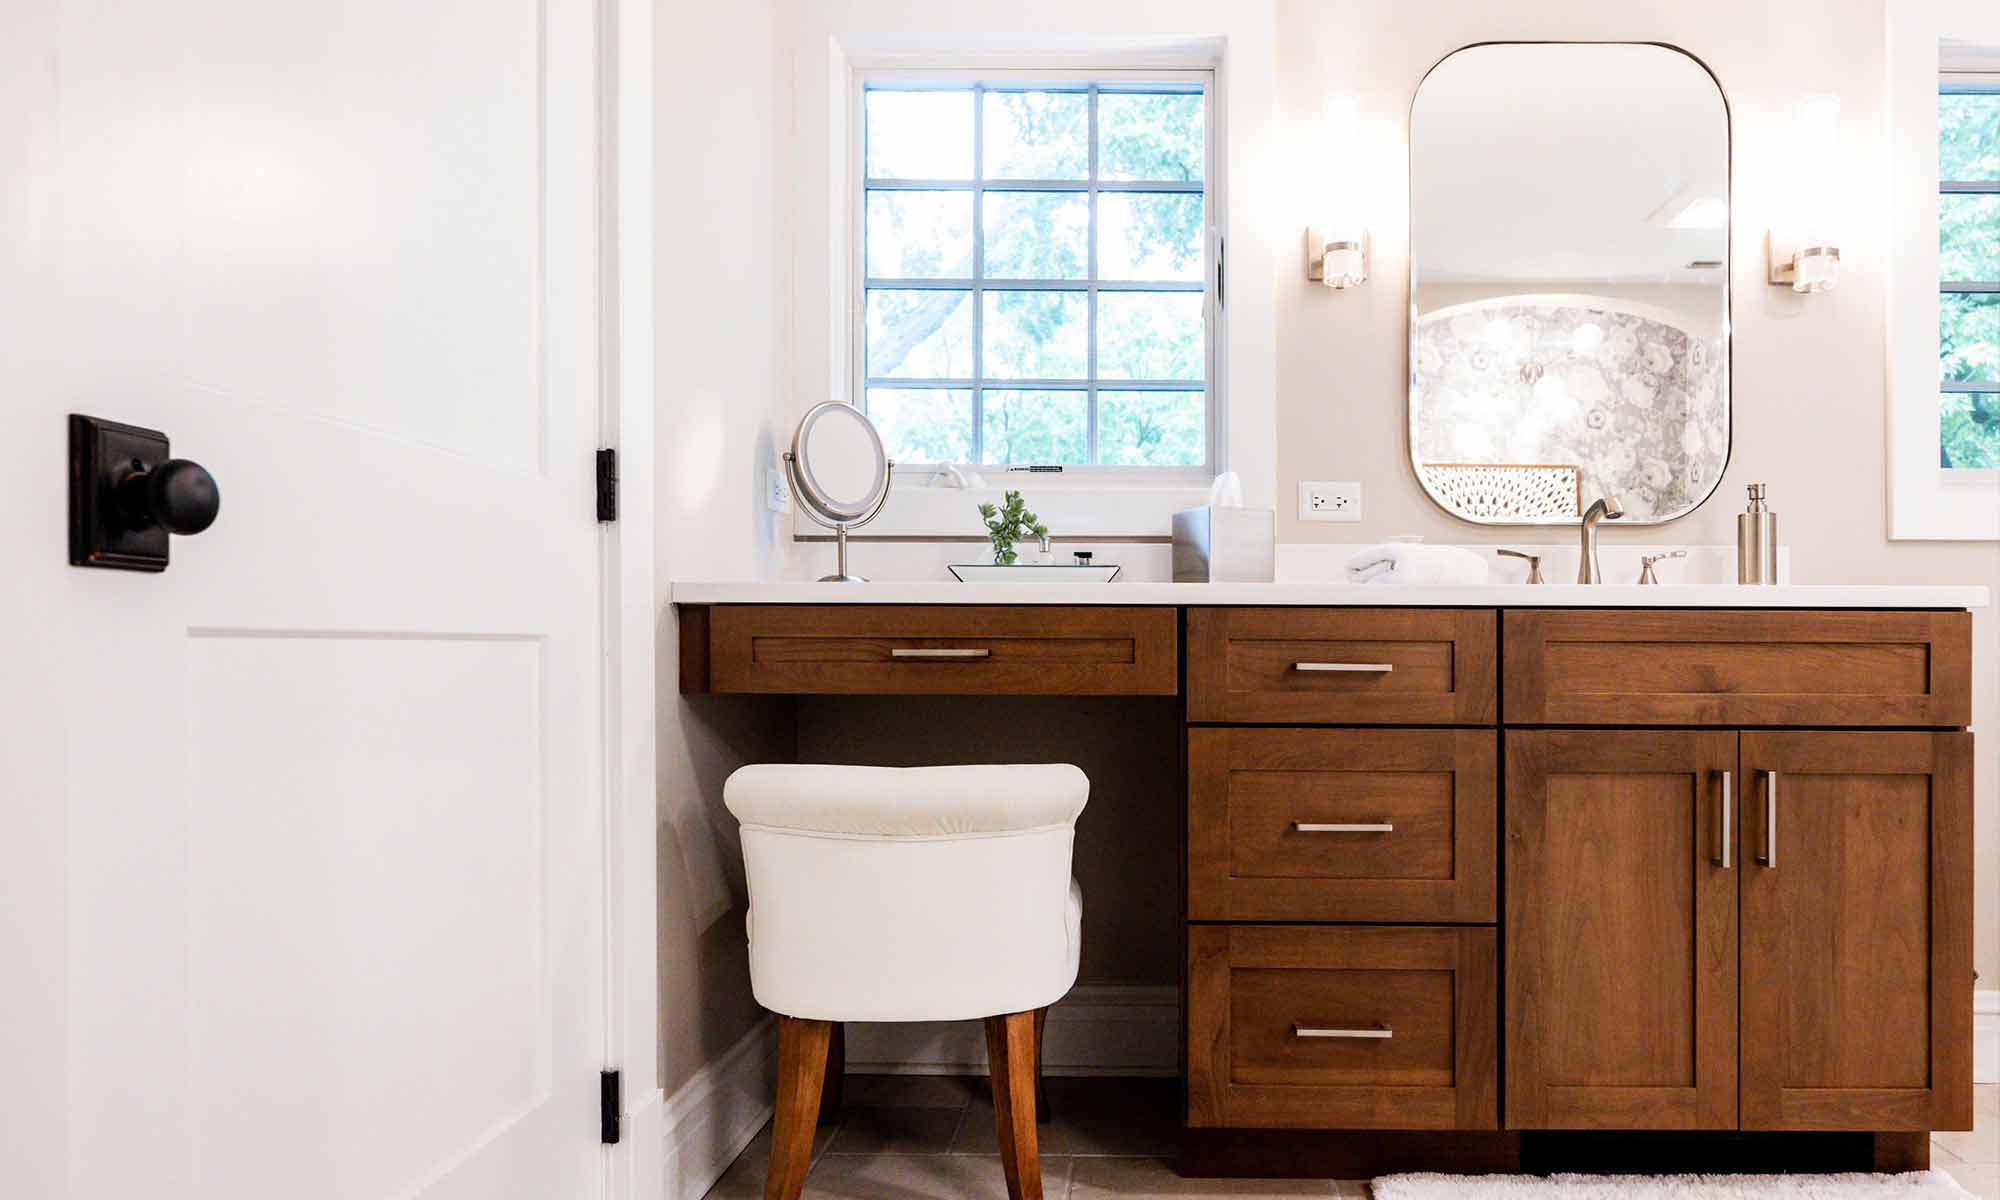 primary bathroom with wood cabinets, windows and makeup station